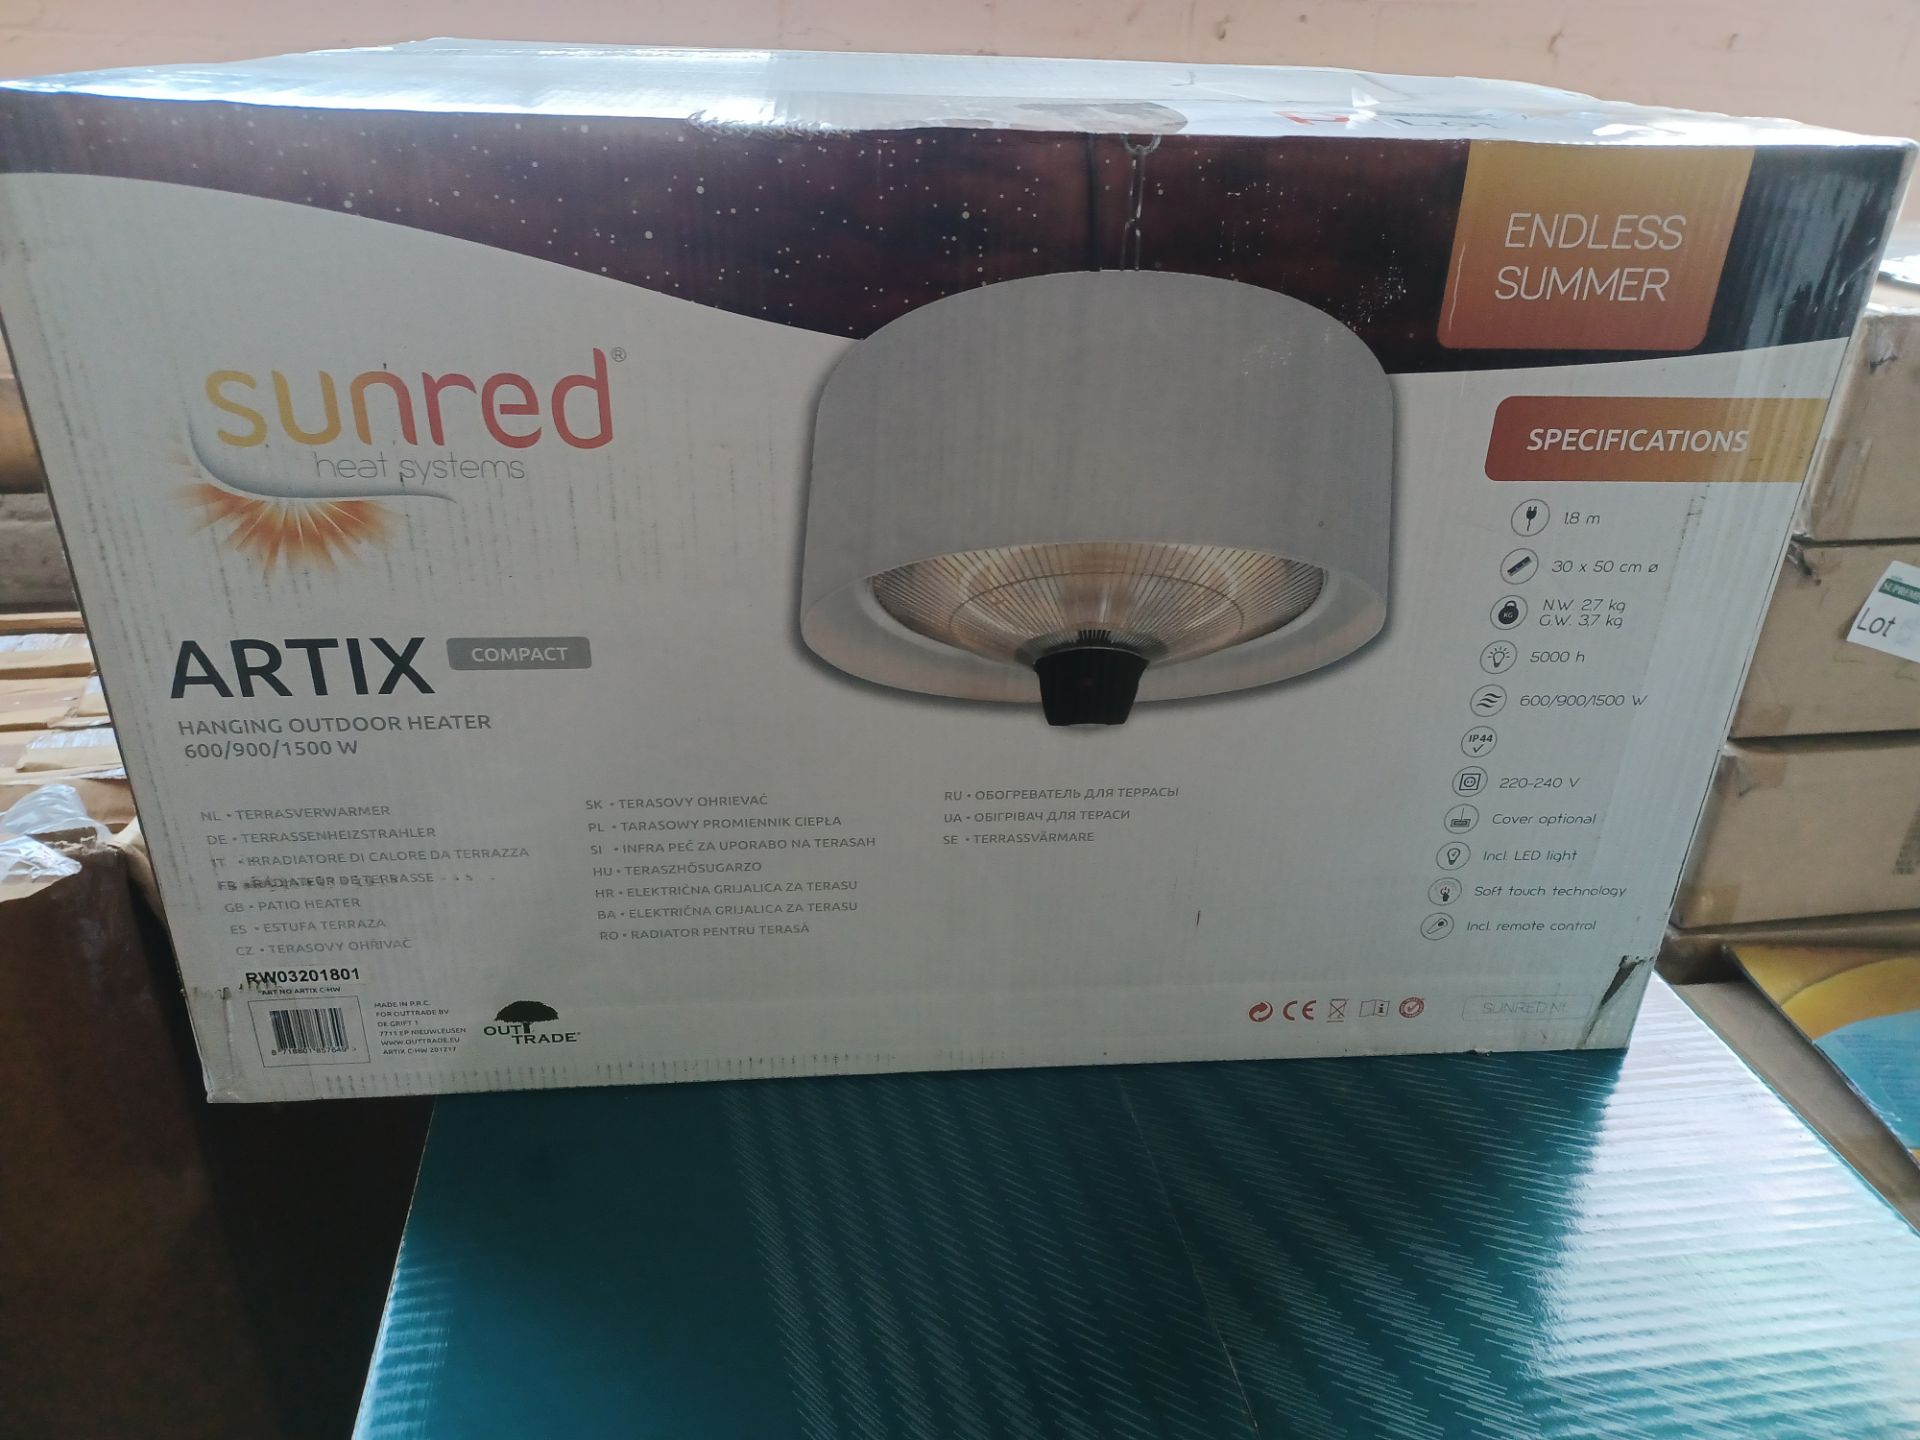 NEW BOXED SUNRED HEAT SYSTEMS ARTIX COMPACT HANGING OUTDOOR HEATER. MULTIPLE HEAT SETTINGS. 600, 900